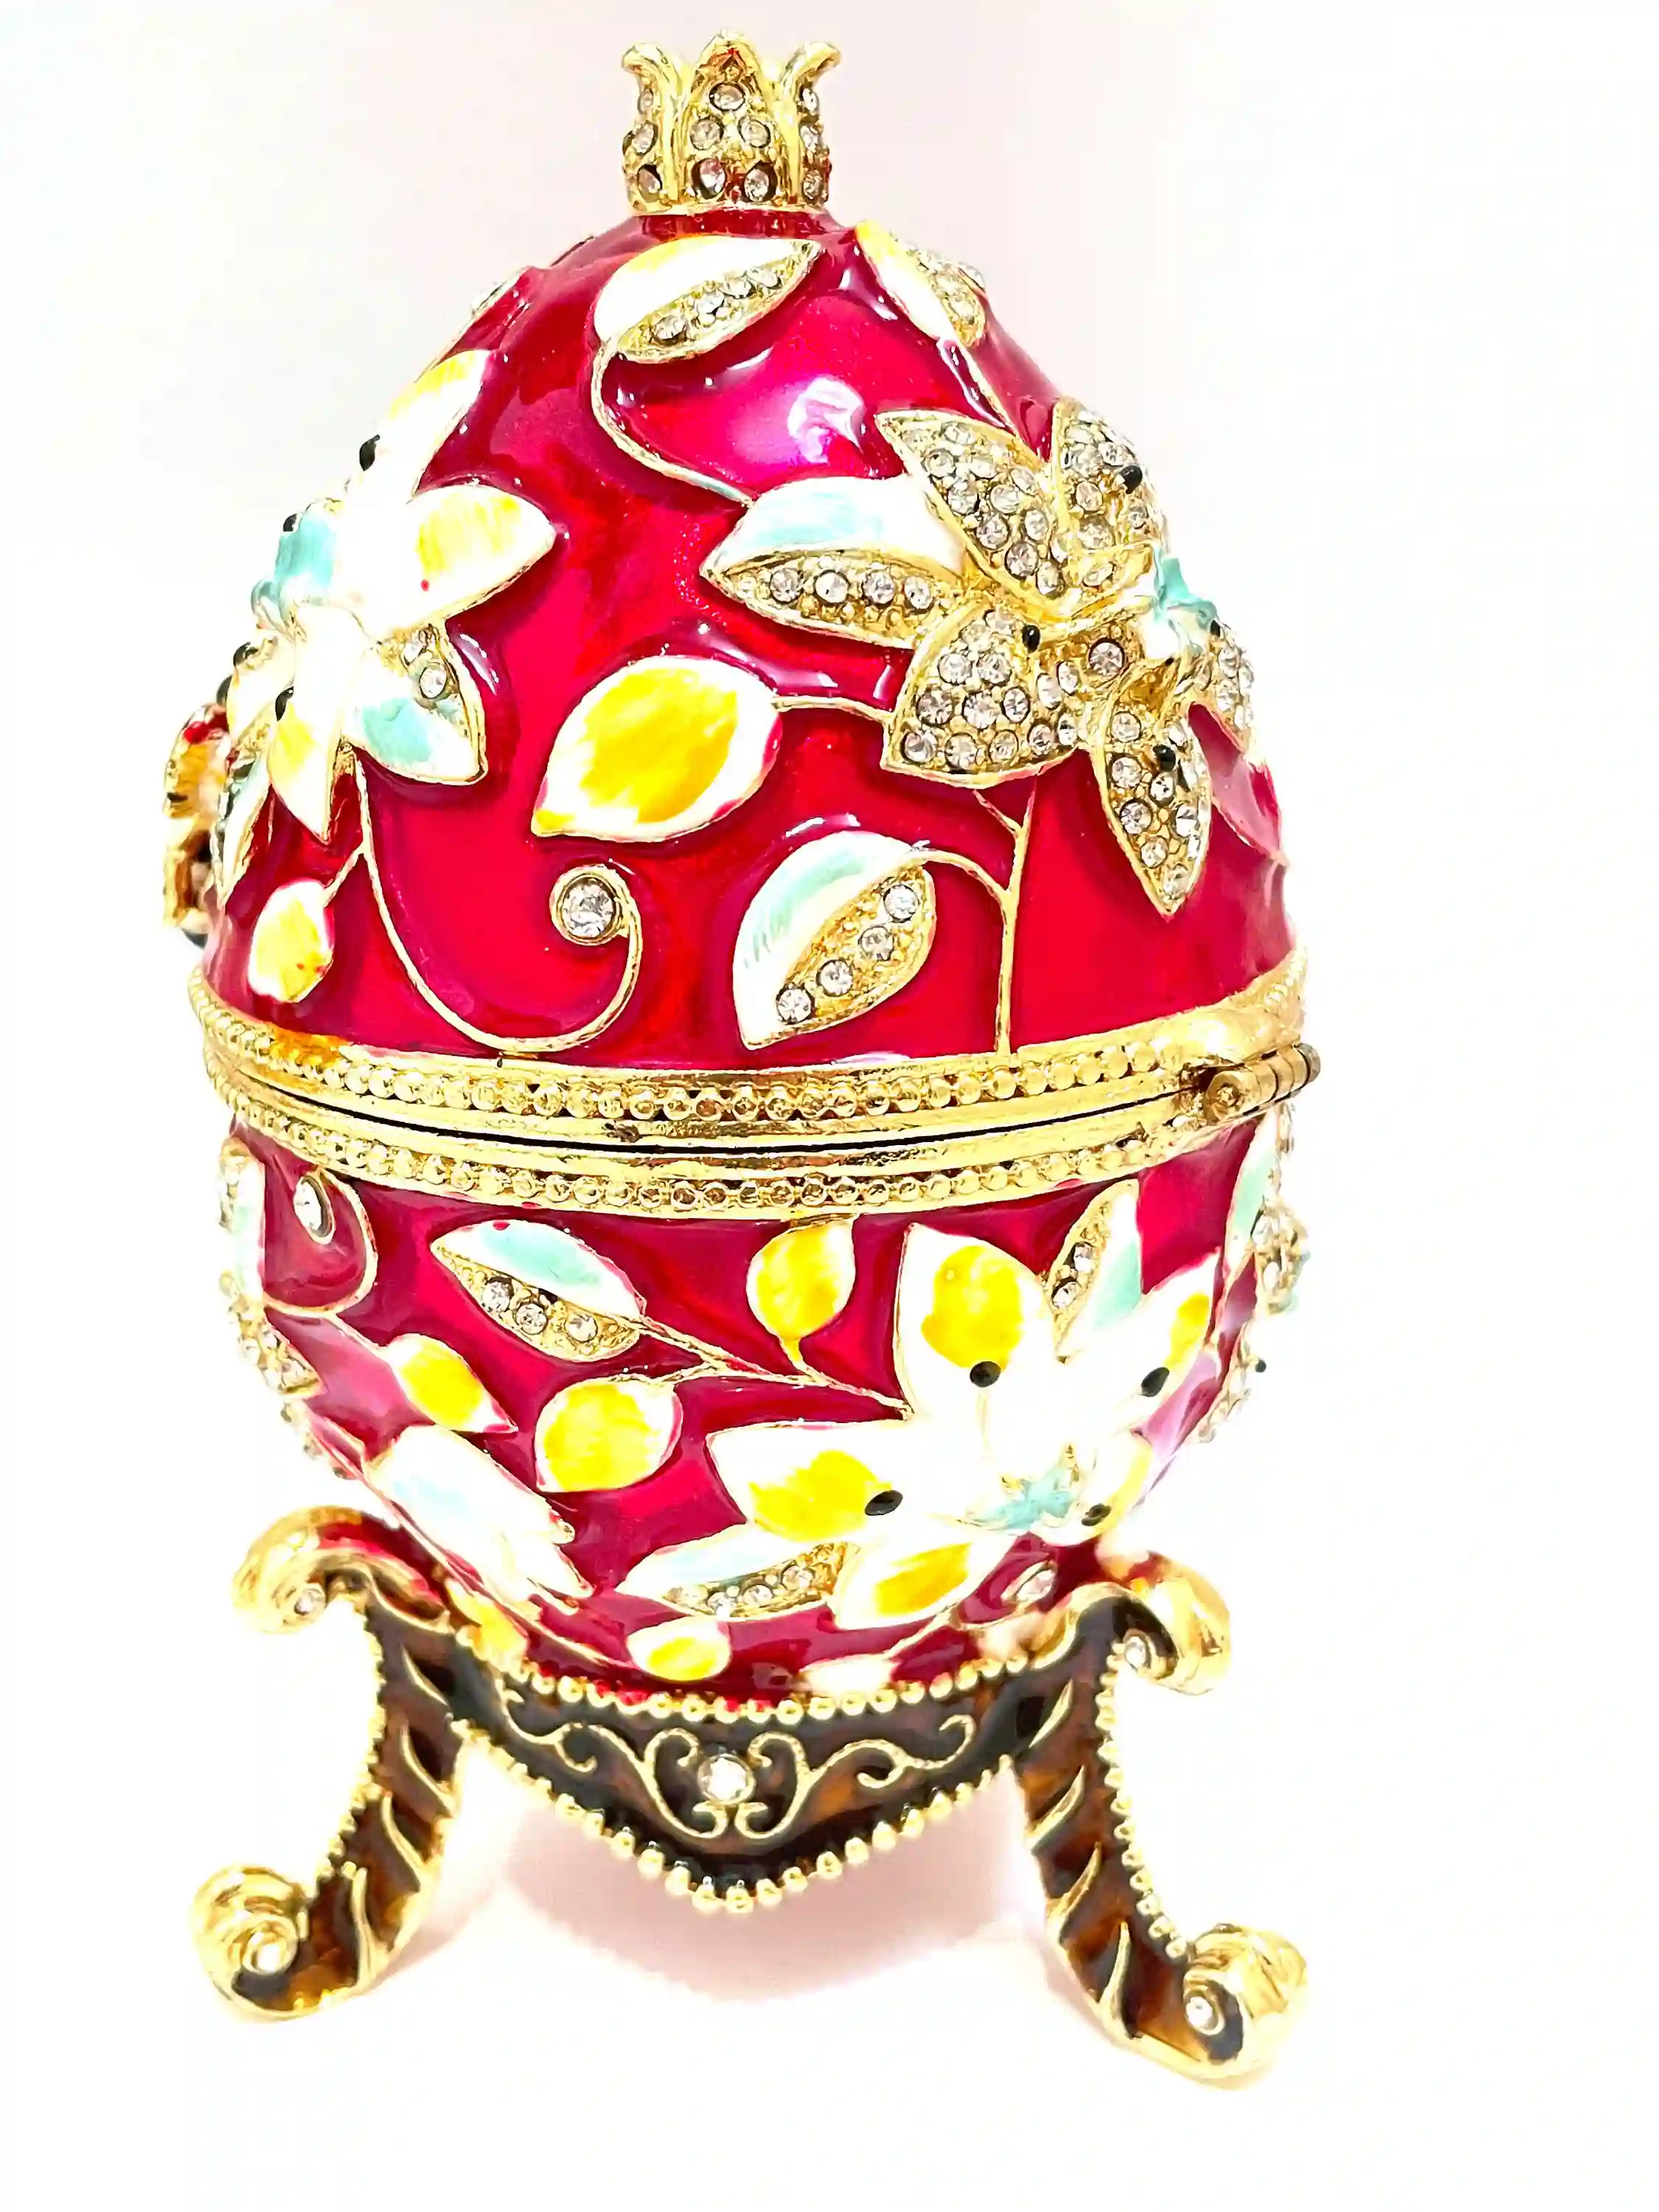 Red Faberge Egg style, Pomegranate Trinket, GOOD LUCK Gift, House Warming gift, Pomagranet Collectors Egg 400Crystal Handset - Handmade Box 